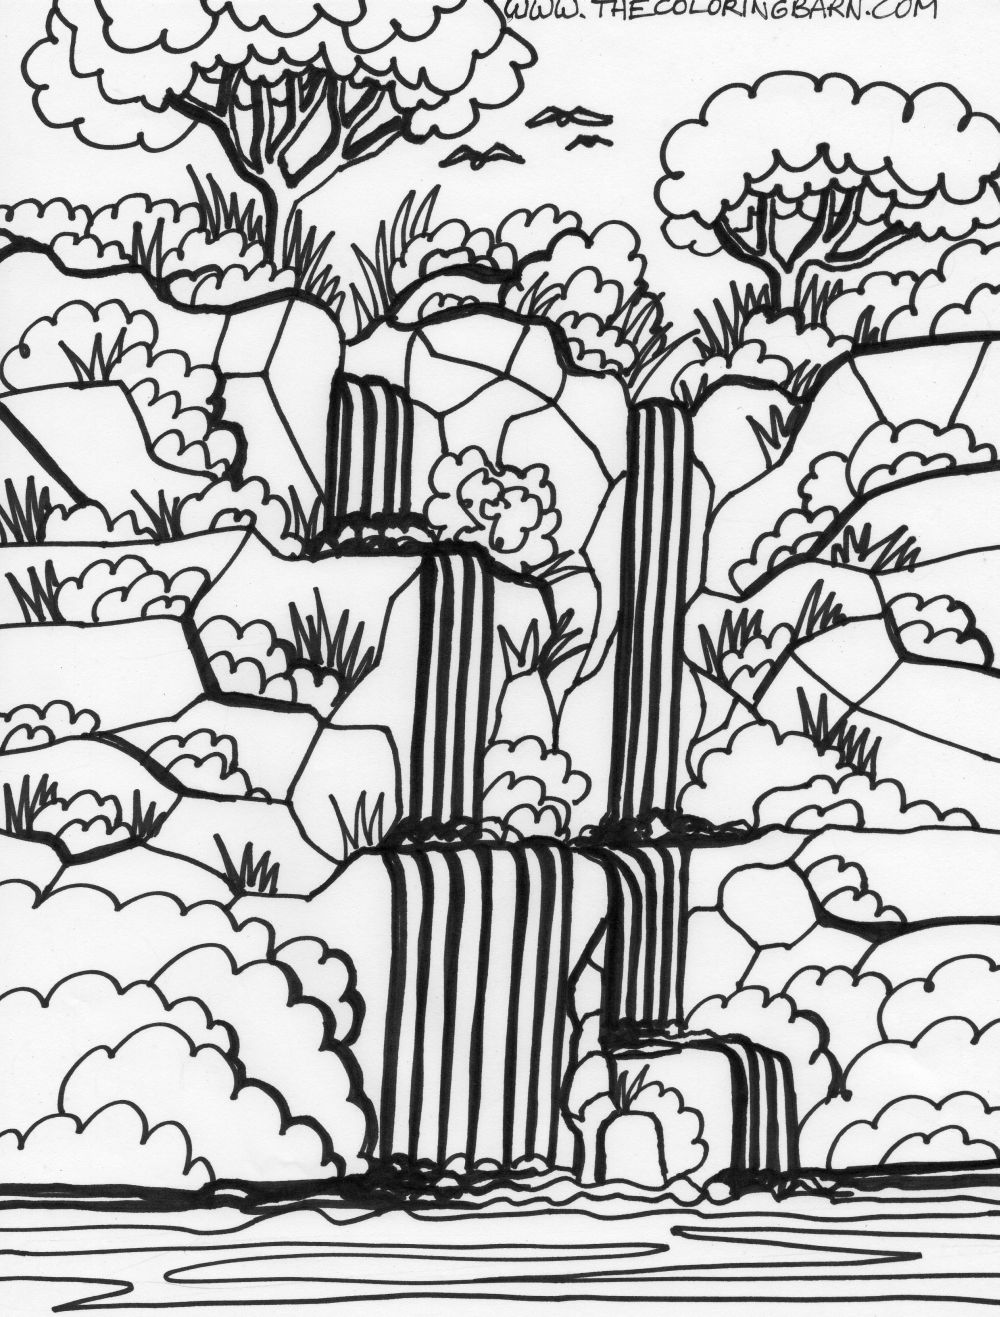 Download Coloring Pages for Kids: Waterfall Coloring Pages for Kids